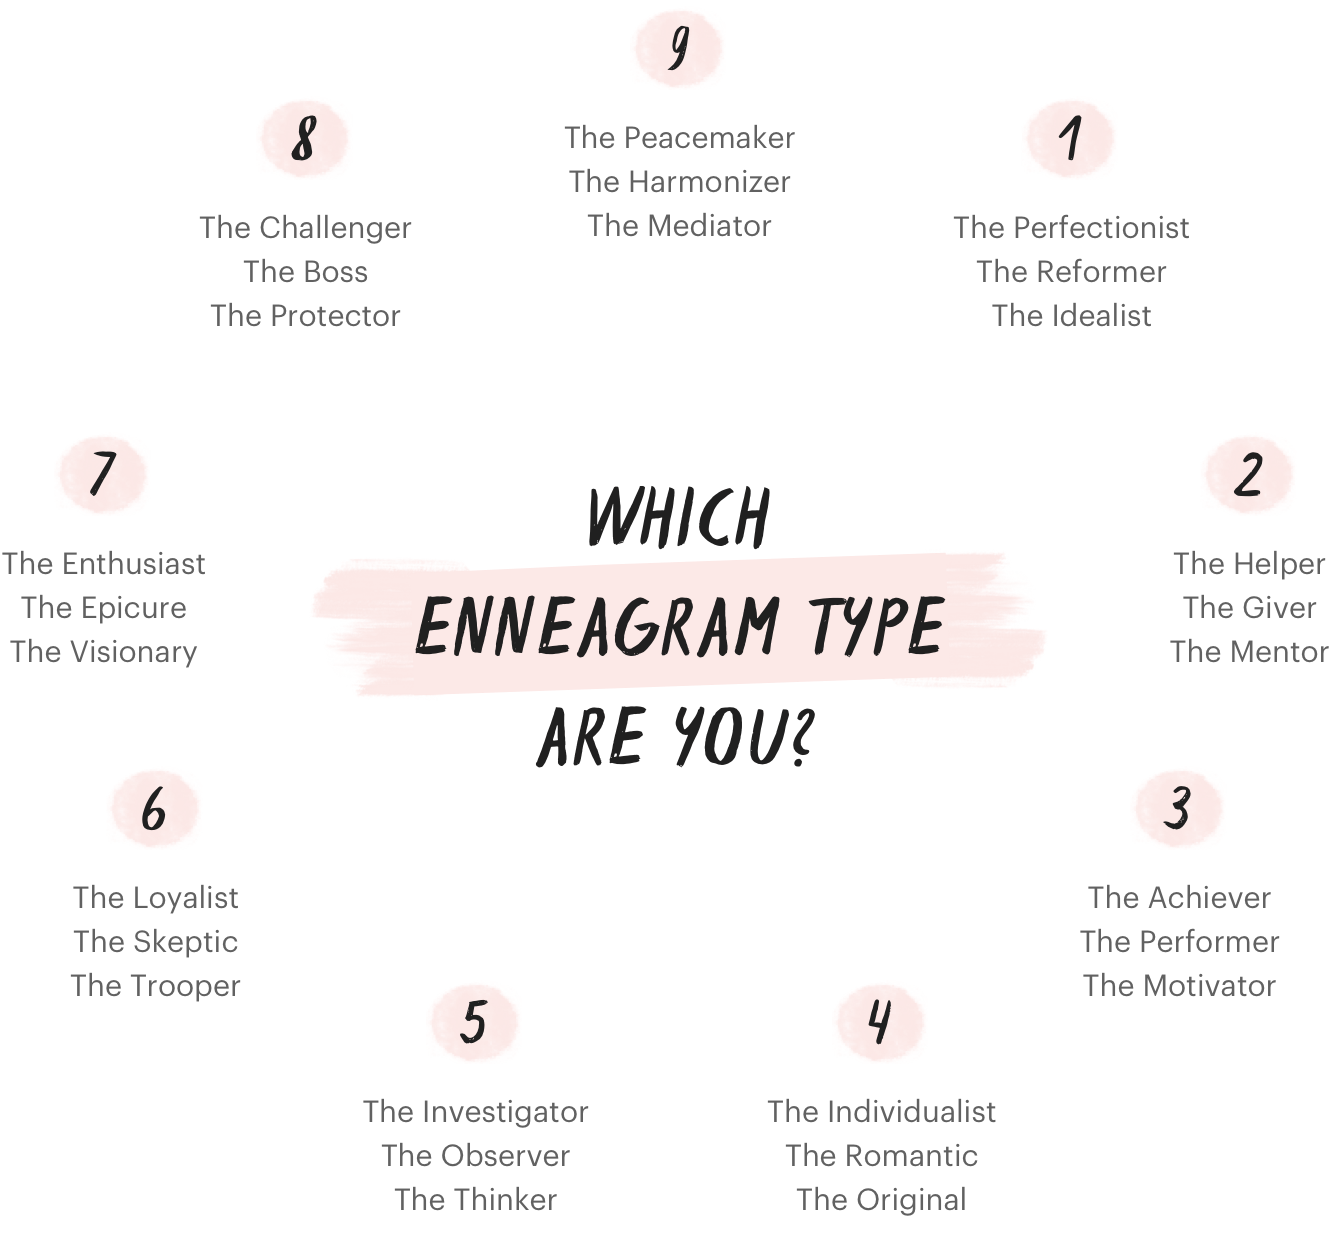 Why You're Probably Late For Church Based on Your Enneagram Type -  Christians Who Curse Sometimes